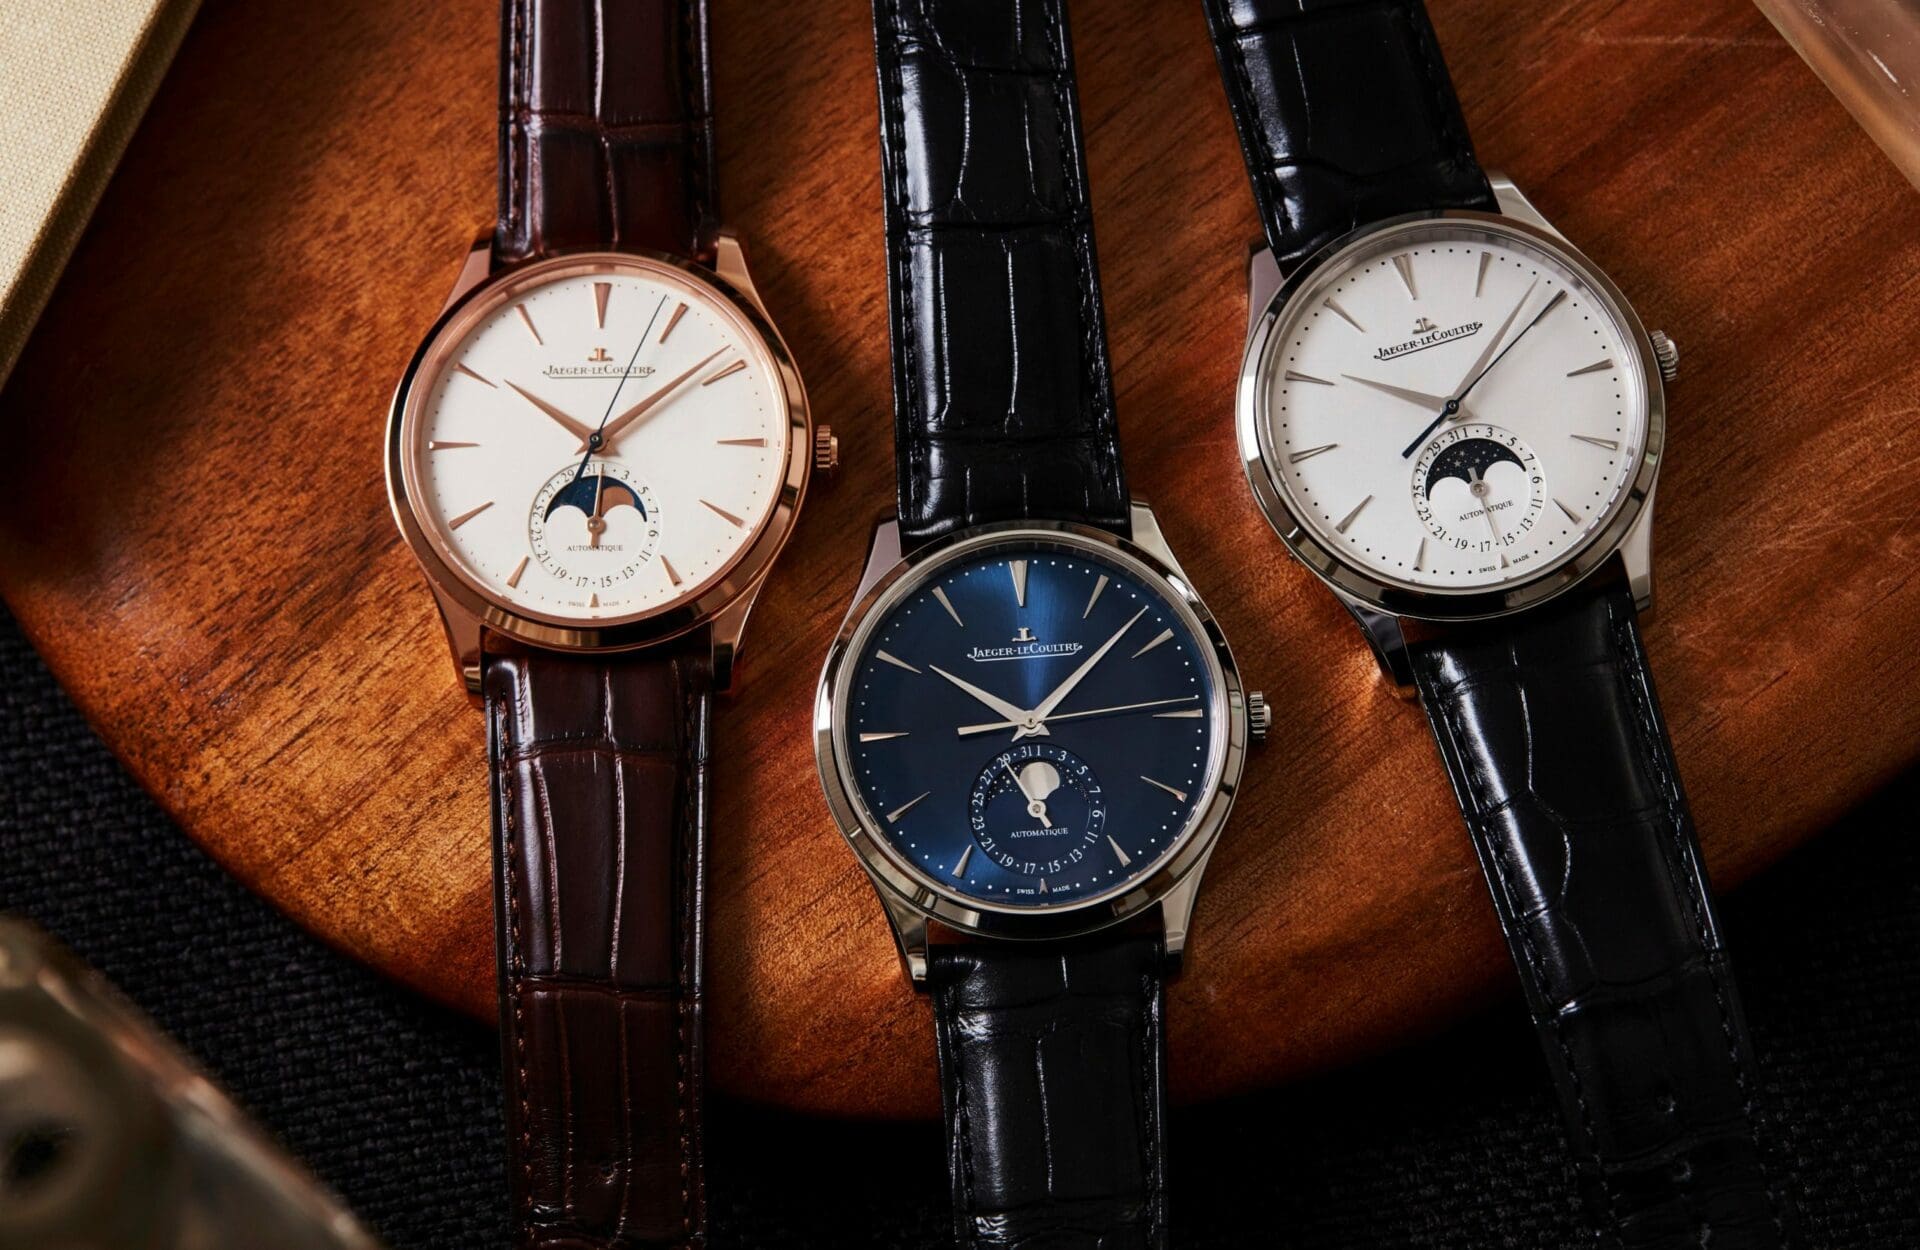 VIDEO: The Jaeger-LeCoultre Master Ultra Thin Moon collection expands with stunning dial variations